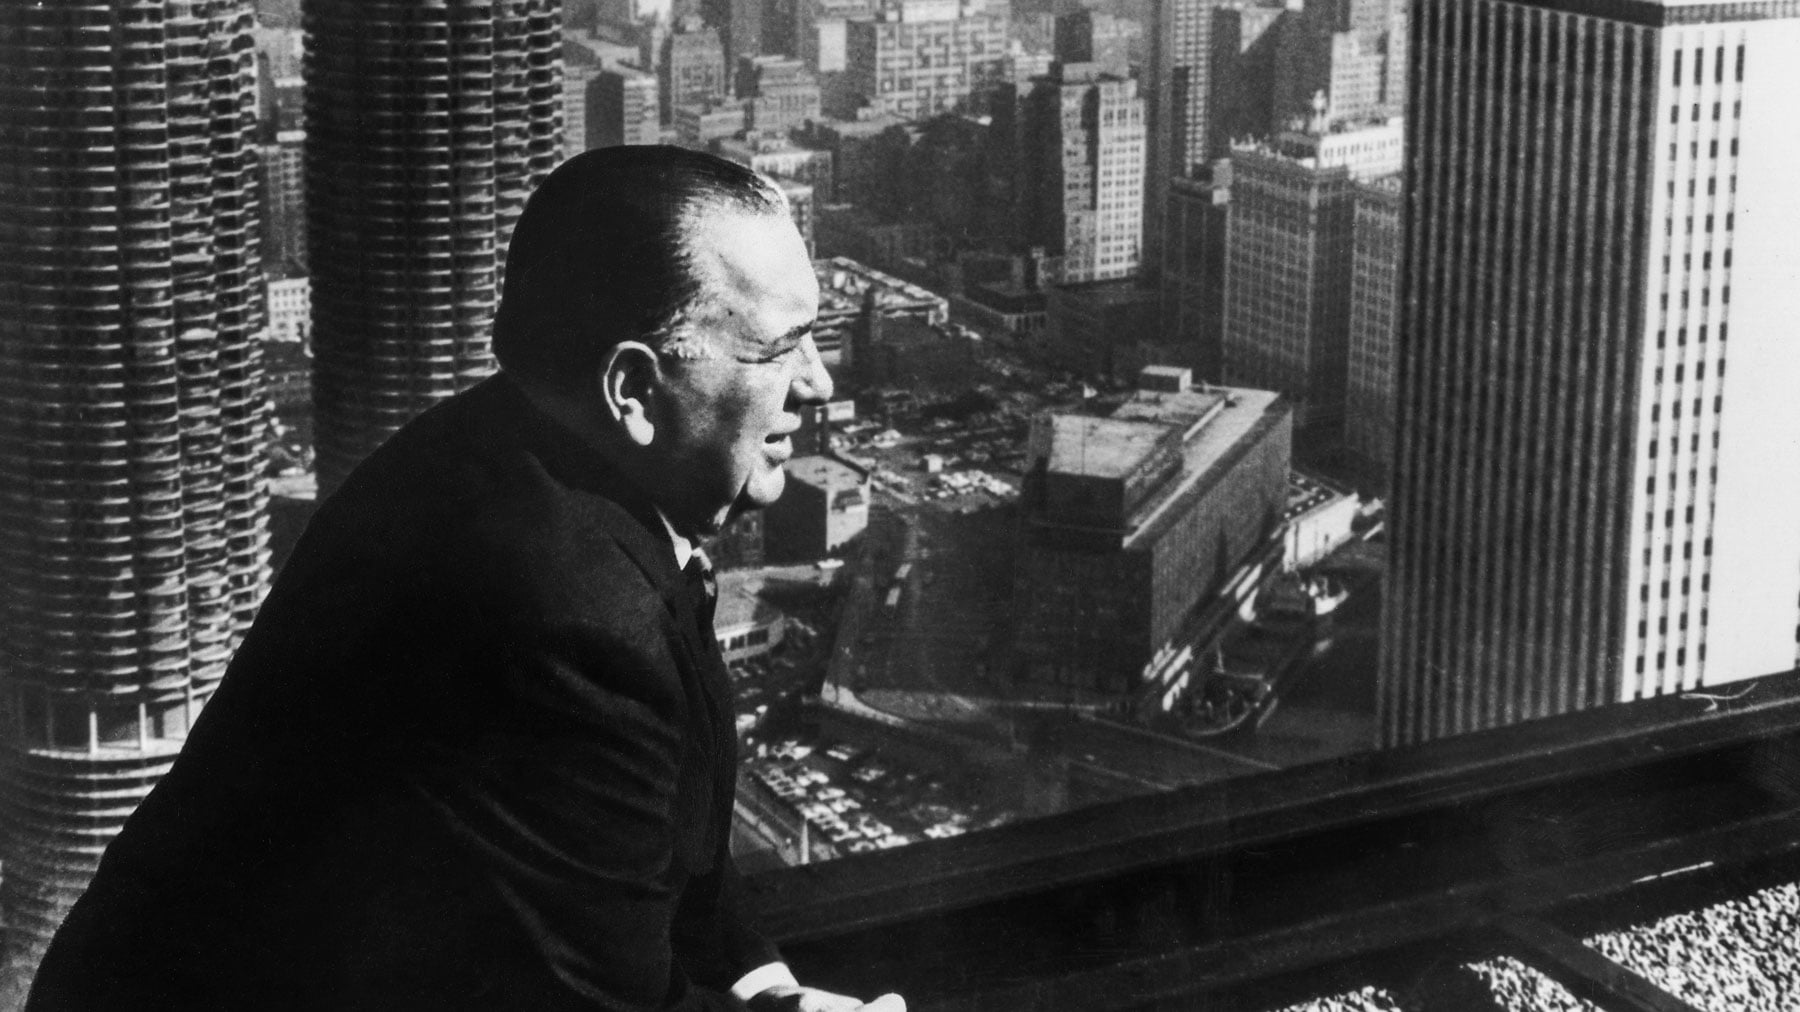 Daley at a downtown construction site in 1969